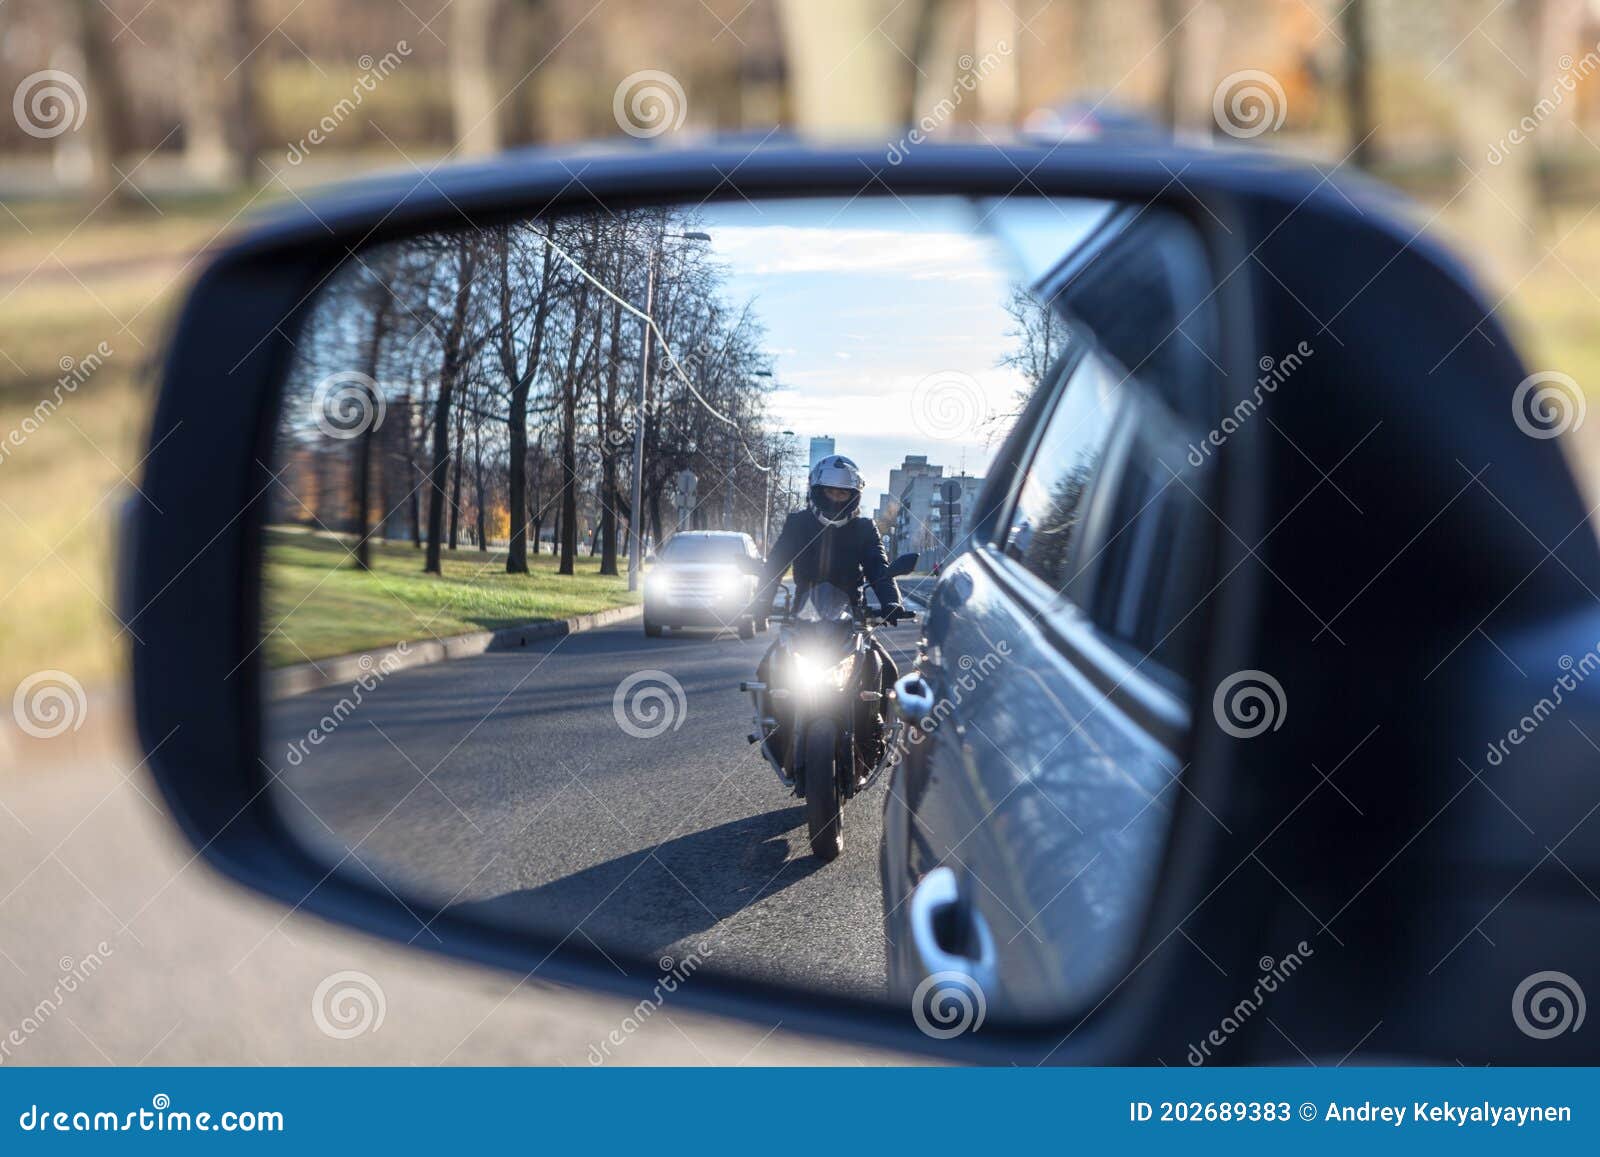 mutual passing, motorcycle and vehicle with dazzle lighting overtaking the car, view in a side mirror. improper driving or traffic